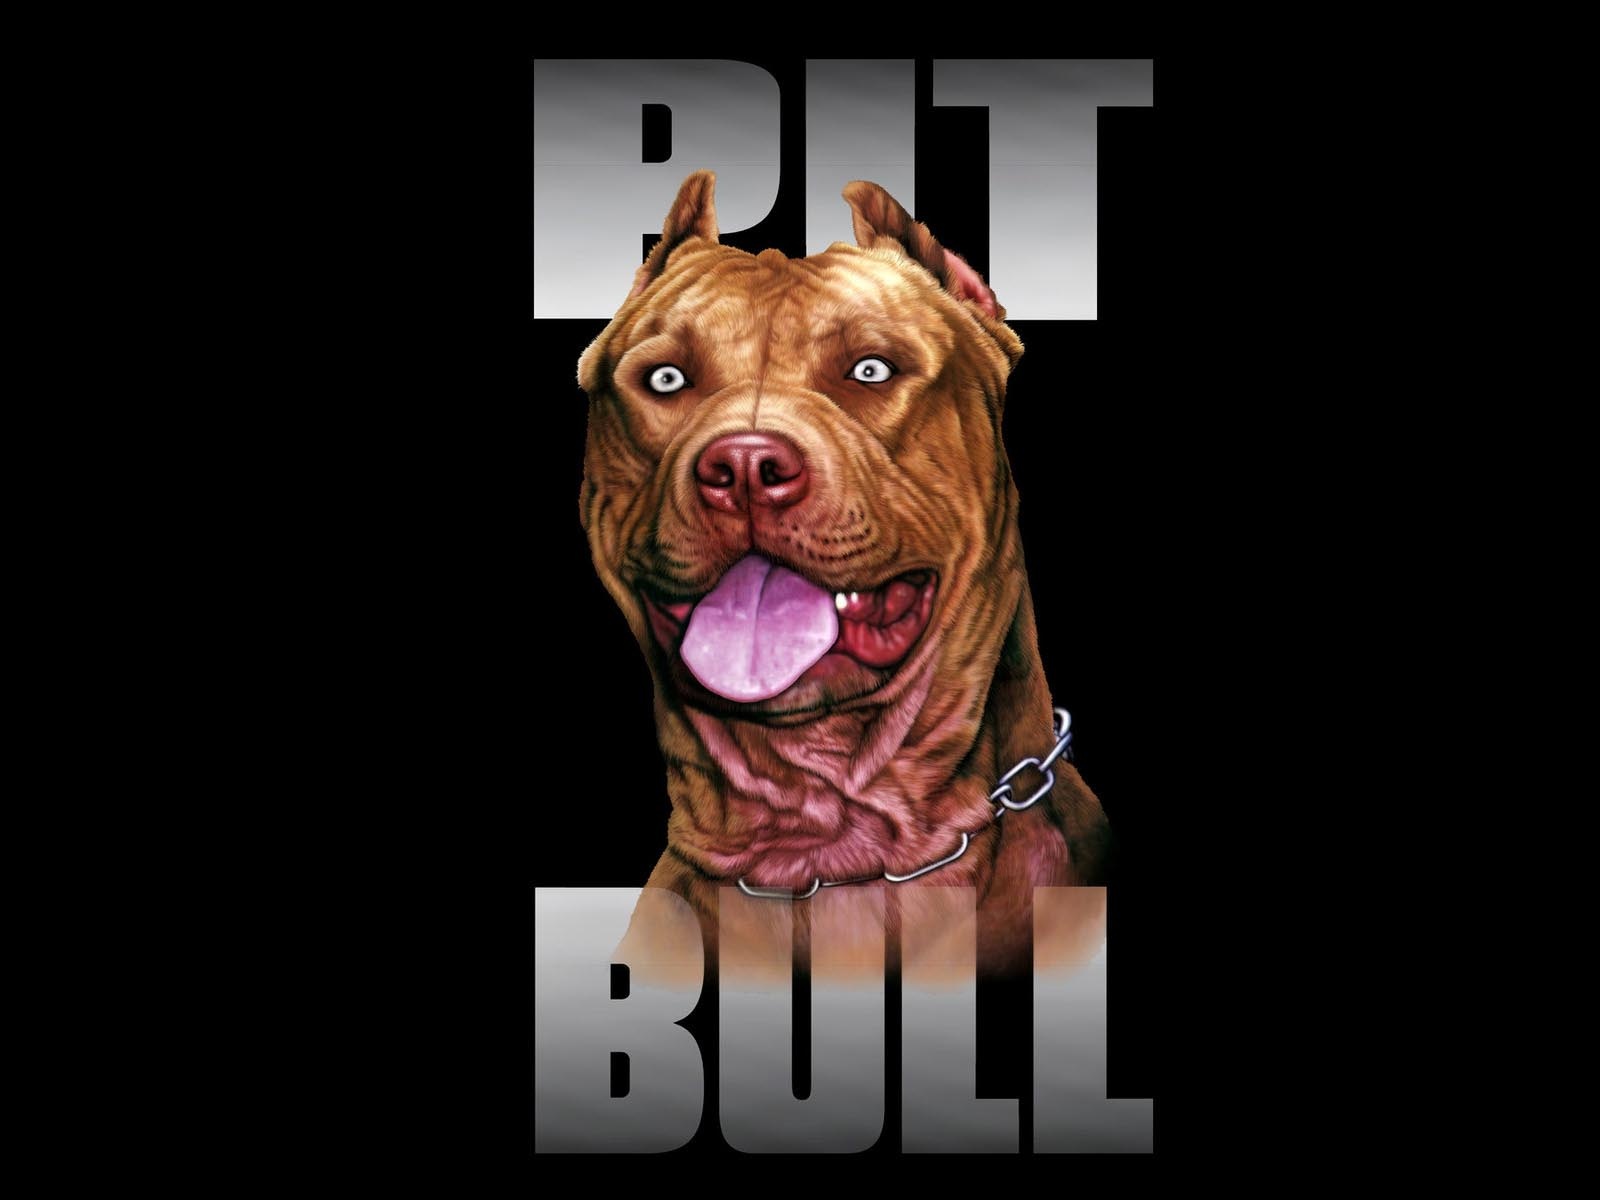 Pitbull Dog Wallpaper Pictures In High